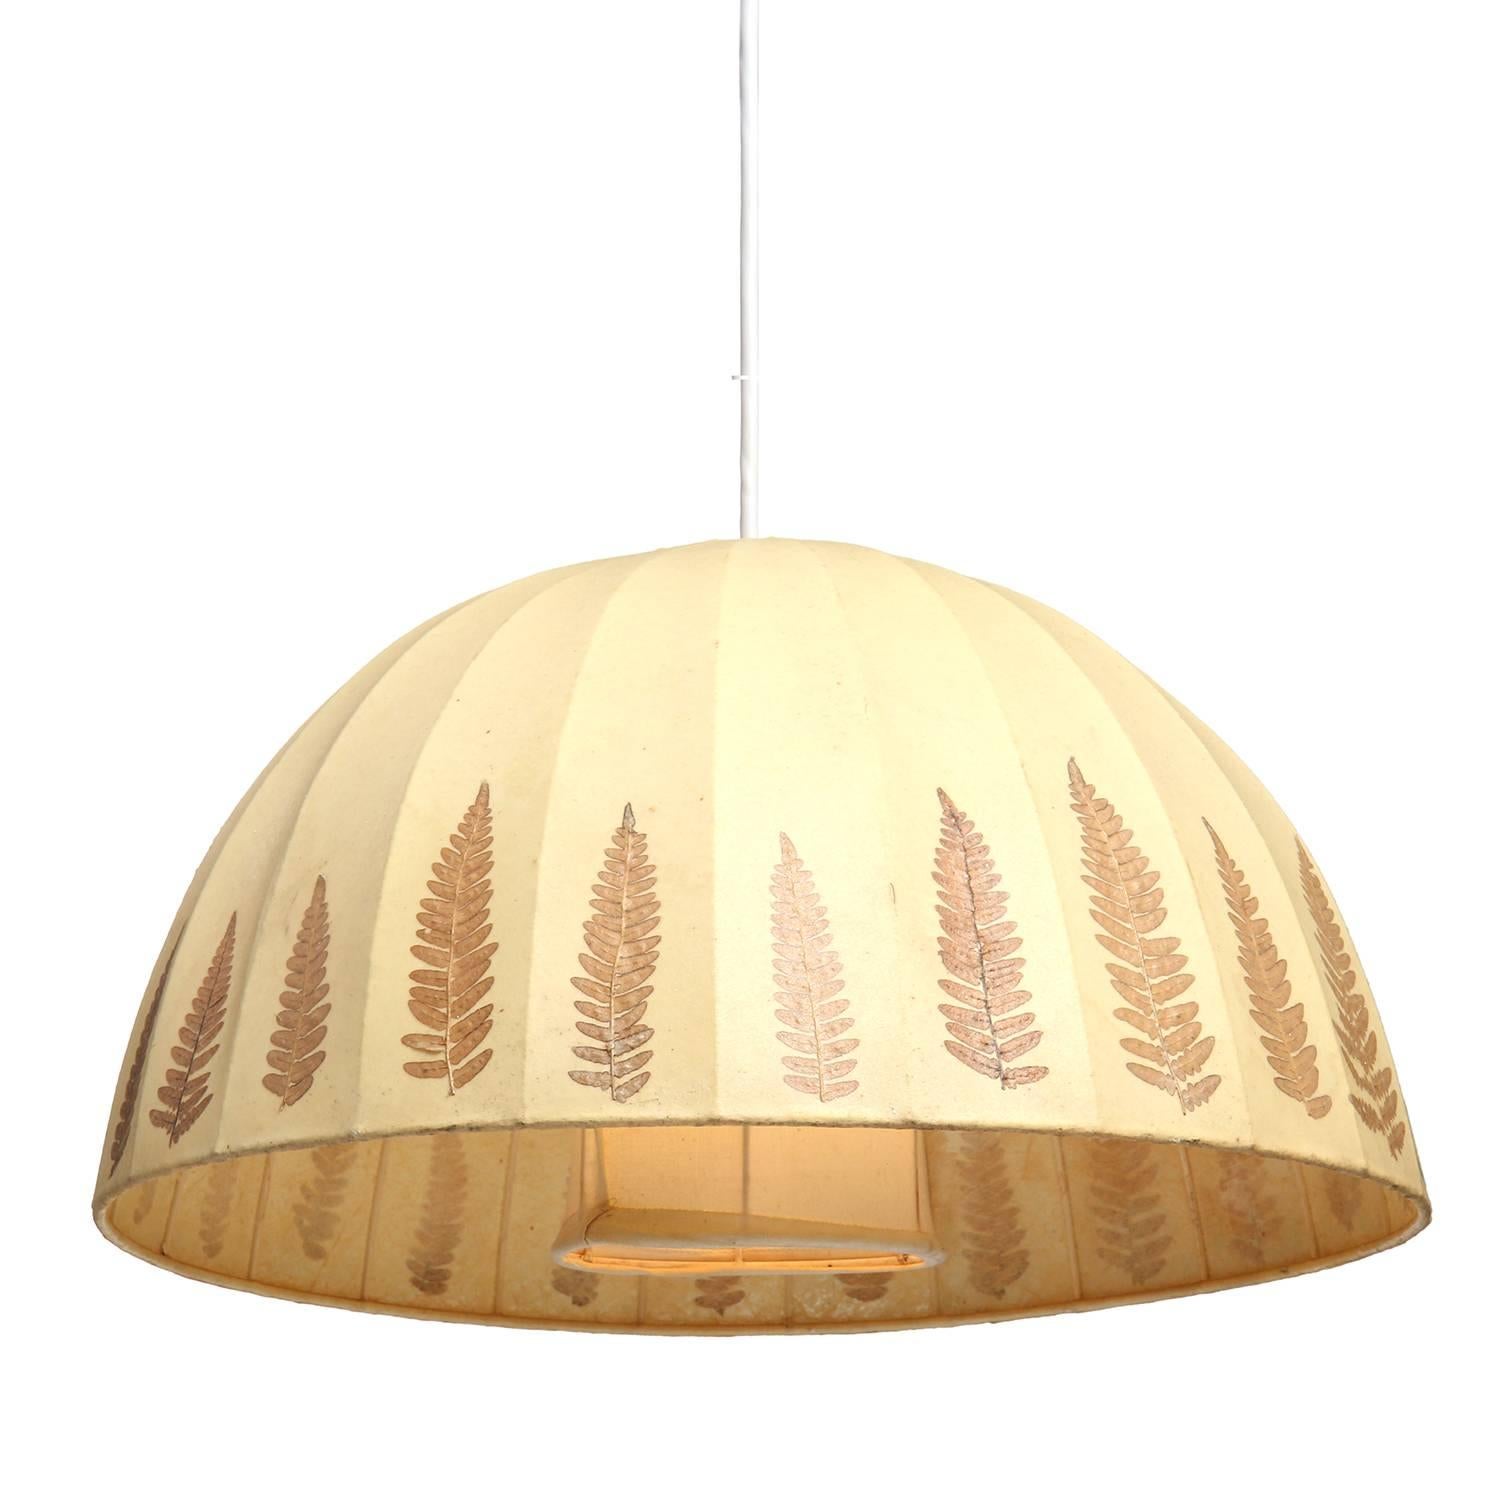 An expressive domed hanging fixture with foliate decoration.